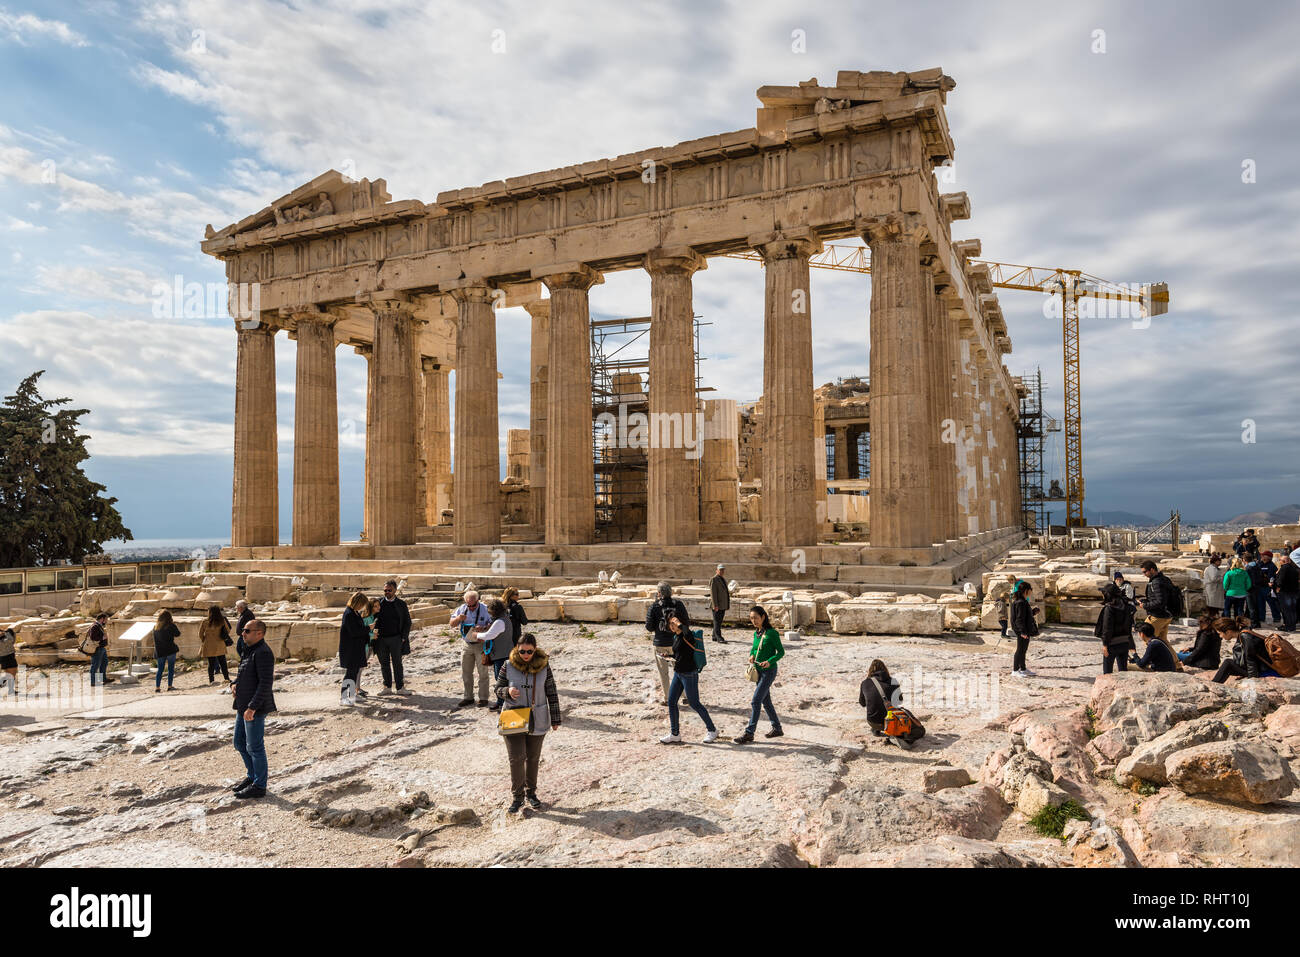 Athens, Greece - November 1, 2017: Many tourists visiting ancient temple Parthenon on Acropolis. Acropolis of Athens is an ancient citadel located on  Stock Photo